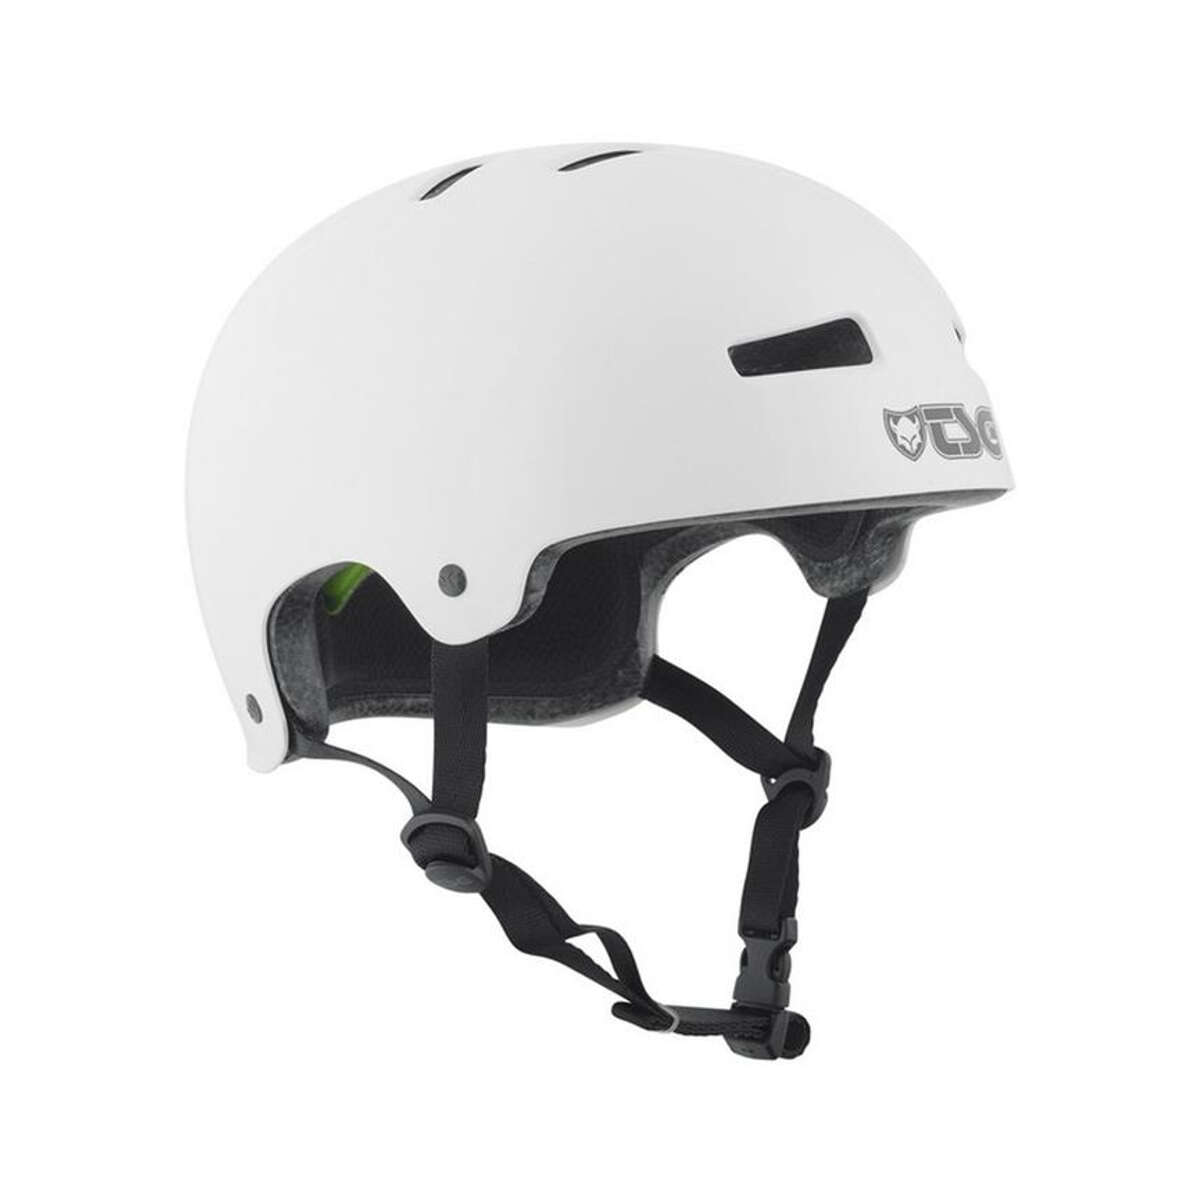 TSG Casque BMX/Dirt Evolution Injected Color - Injected White